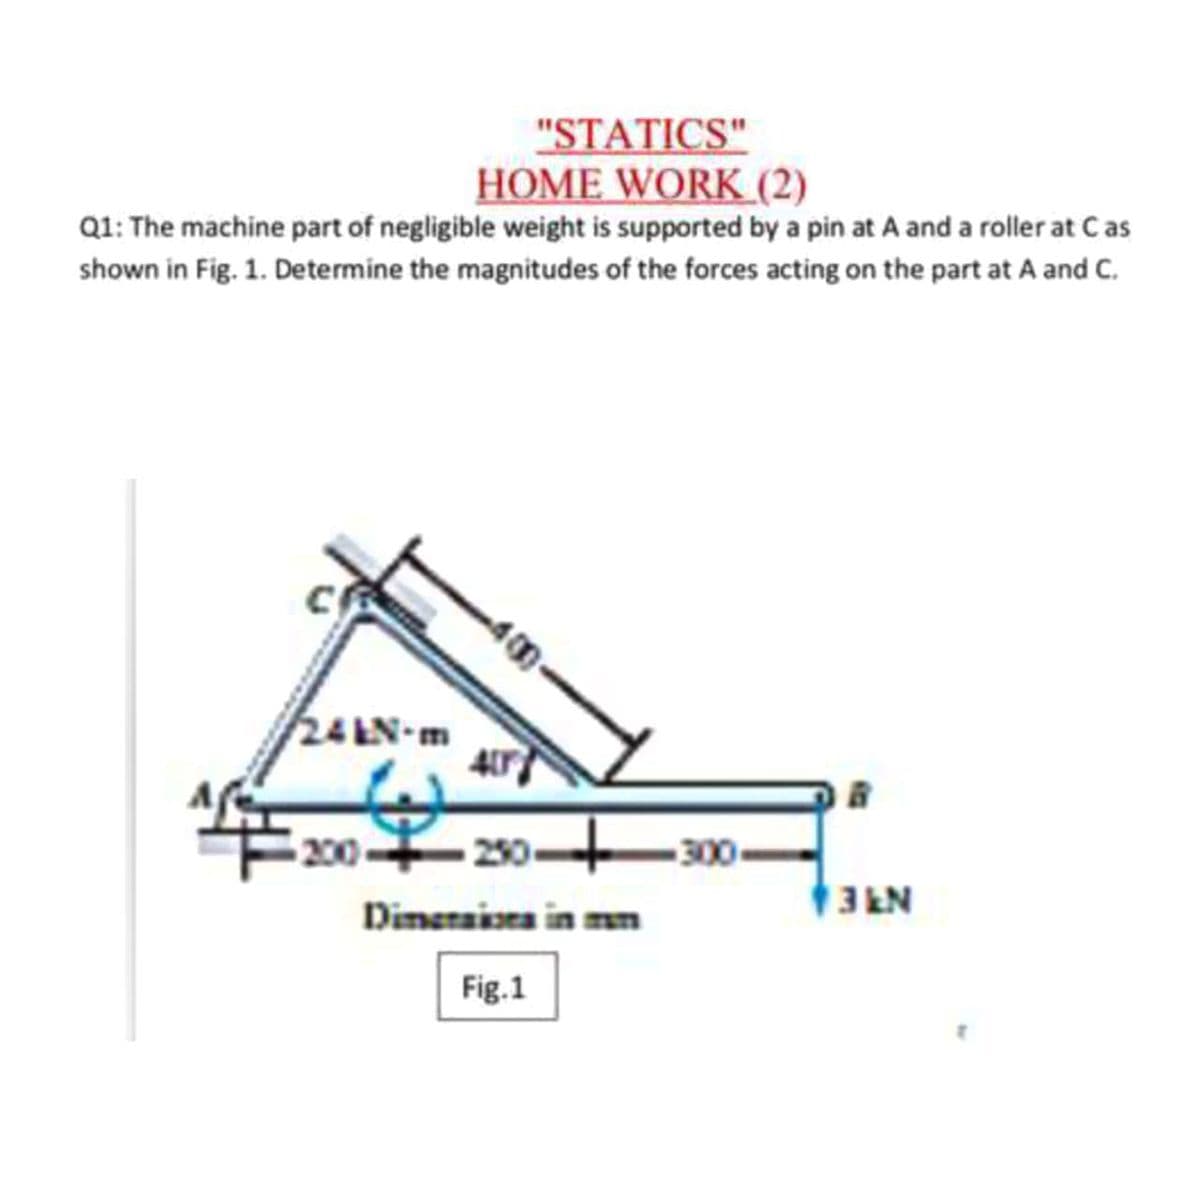 "STATICS"
HOME WORK (2)
Q1: The machine part of negligible weight is supported by a pin at A and a roller at Cas
shown in Fig. 1. Determine the magnitudes of the forces acting on the part at A and C.
24 EN-m
200 230+30-
Dimeraiara in m
3EN
Fig.1
